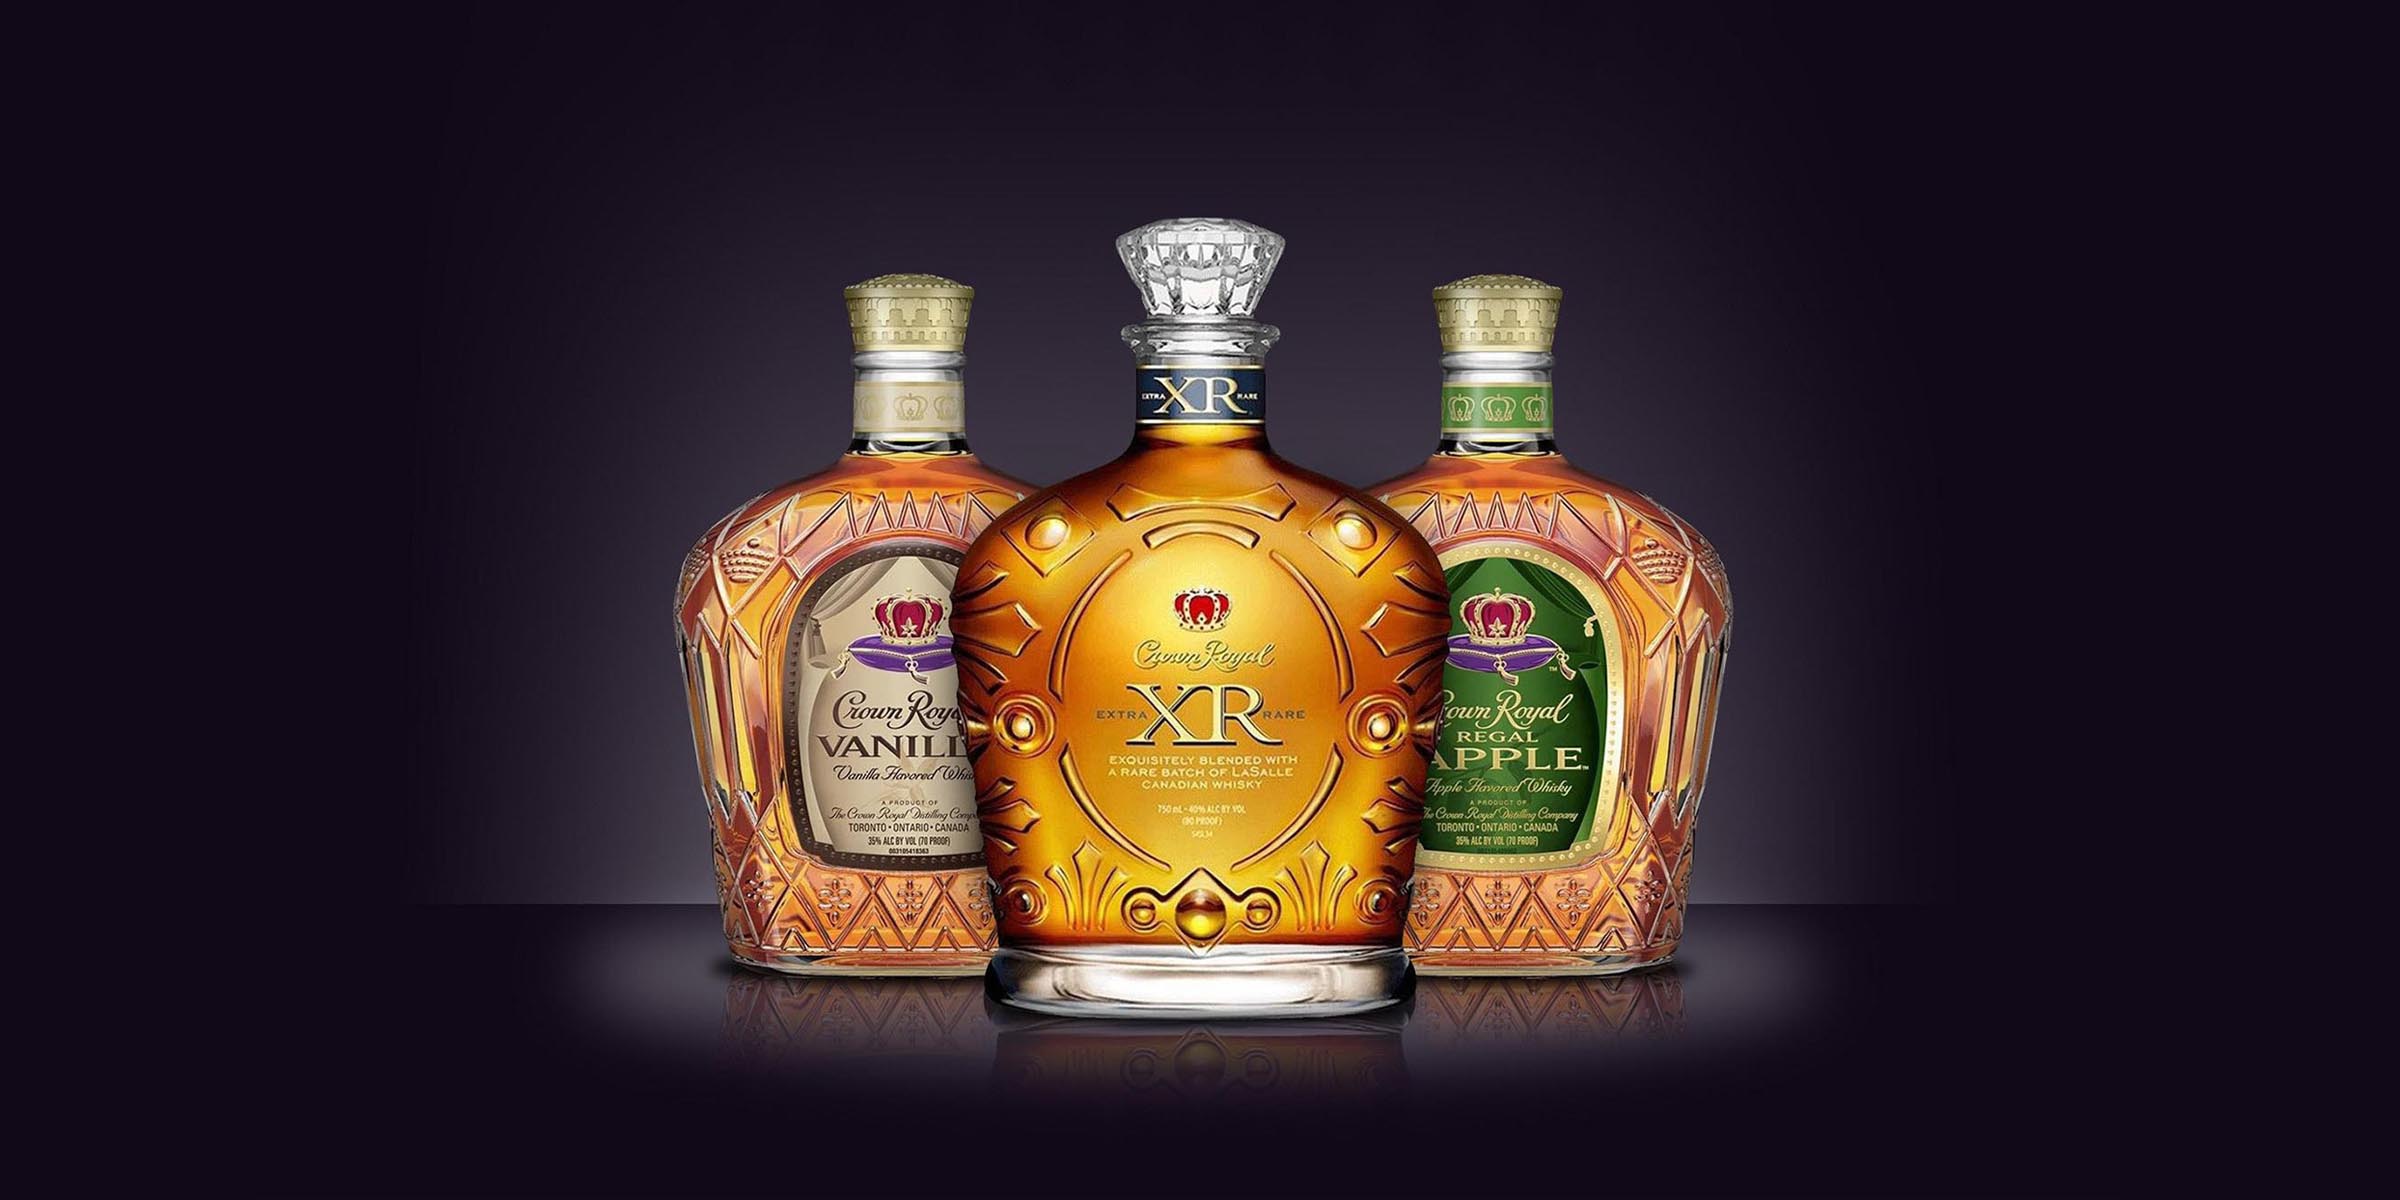 CROWN ROYAL IS BRINGING FLAVOR TO THE WORLD OF LUXURY WHISKY WITH